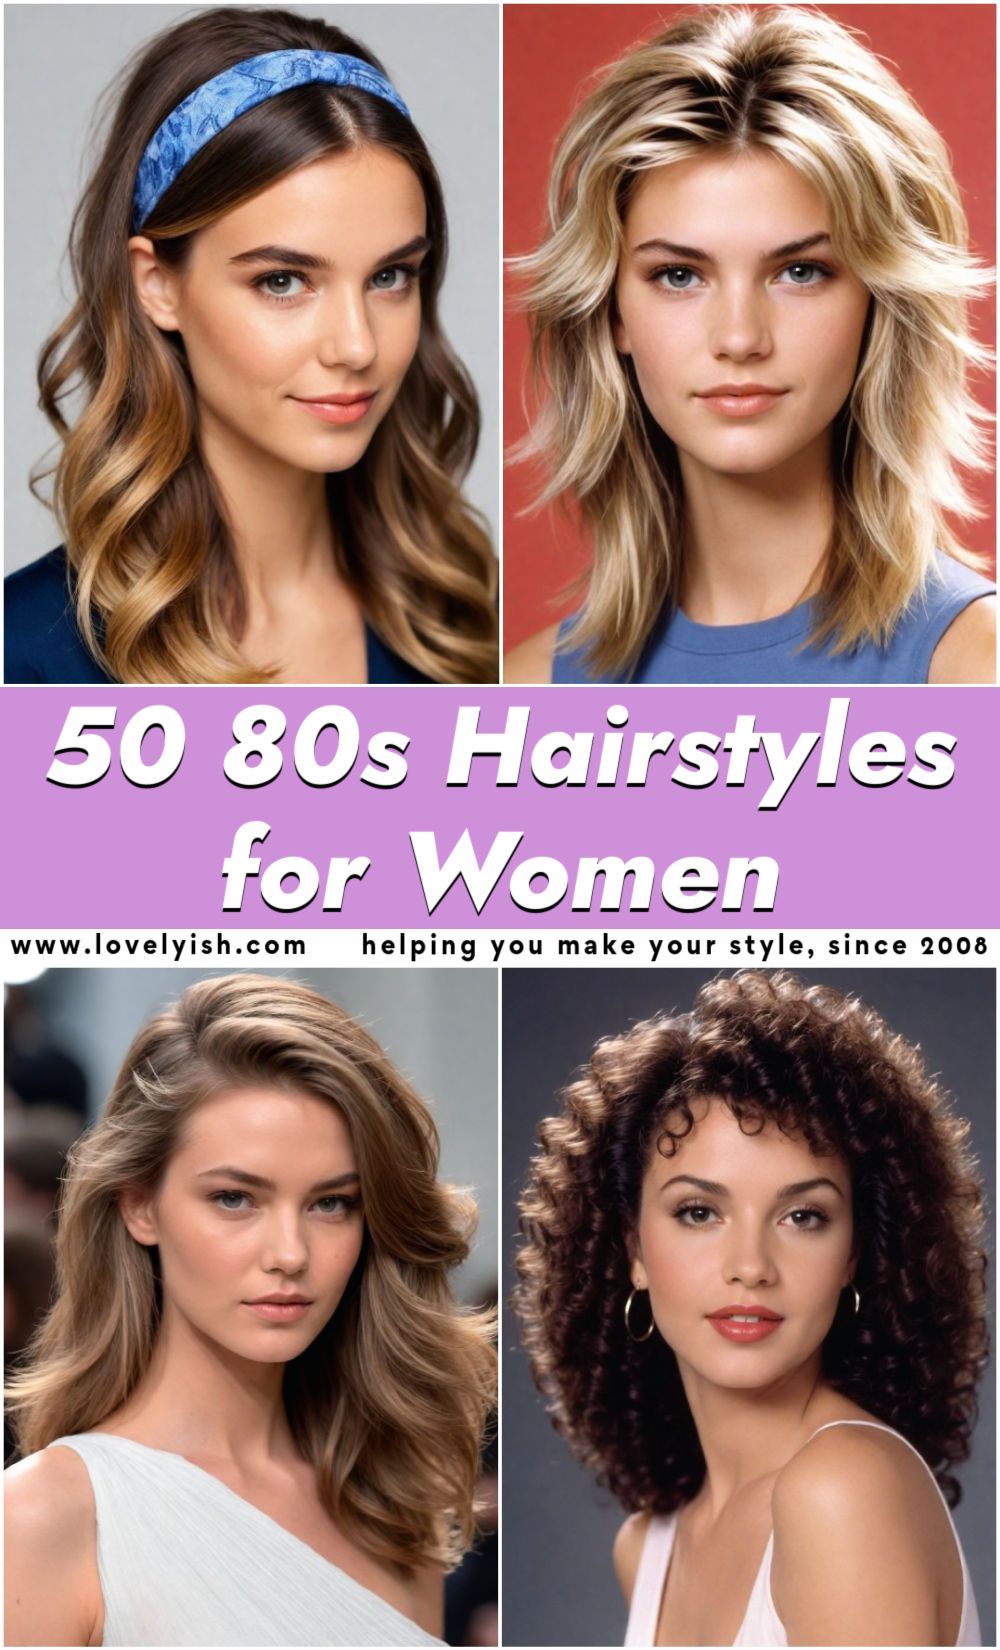 80s hairstyles